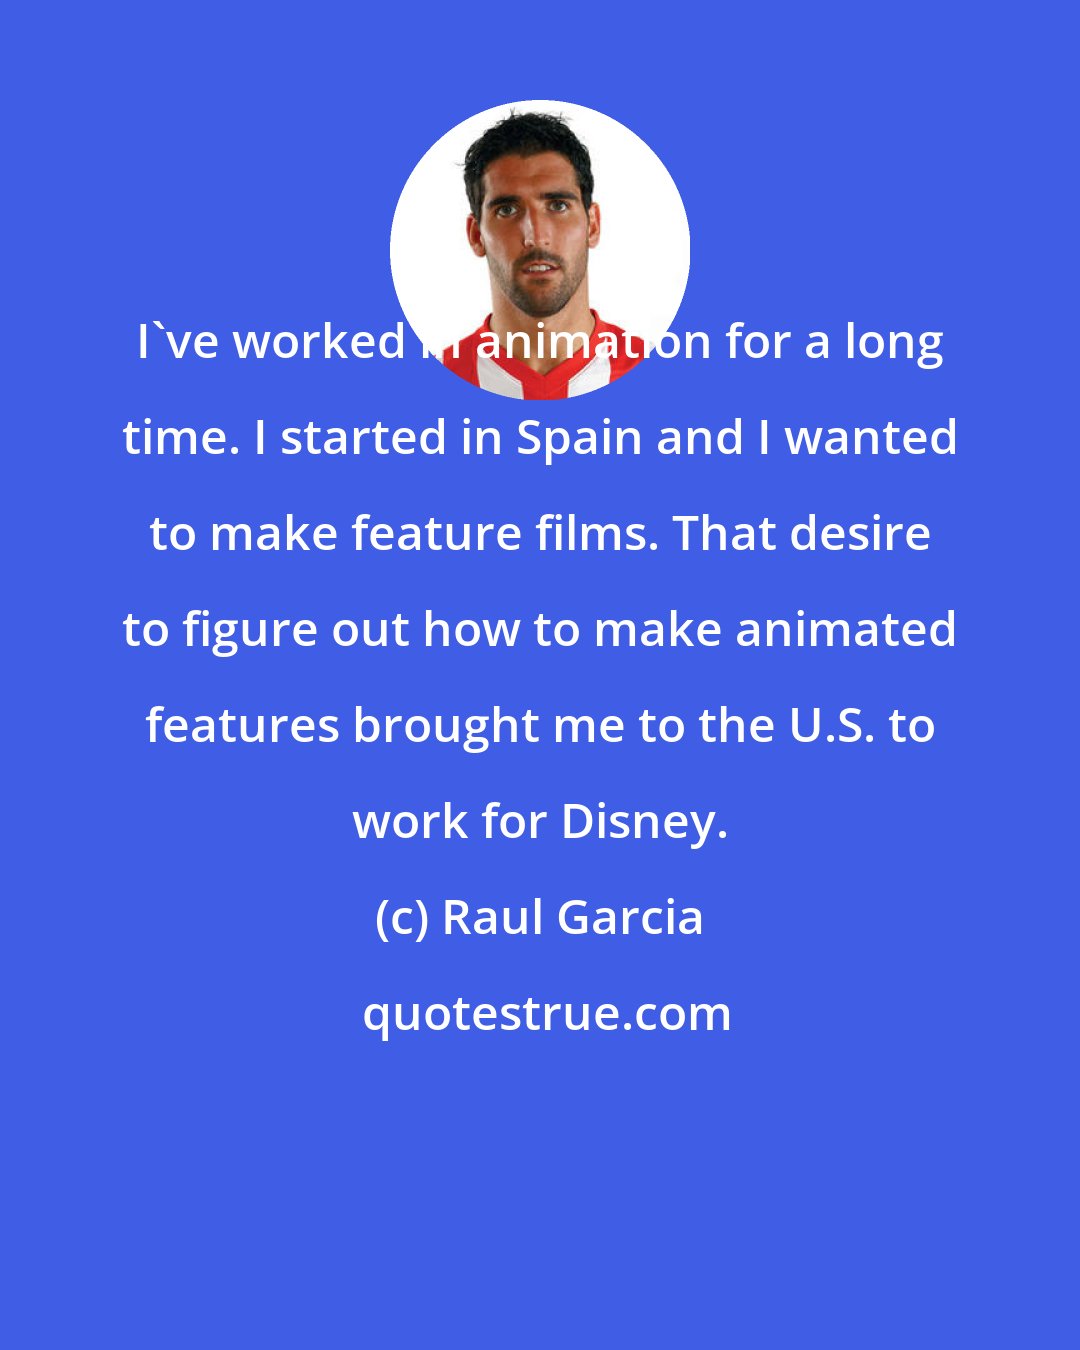 Raul Garcia: I've worked in animation for a long time. I started in Spain and I wanted to make feature films. That desire to figure out how to make animated features brought me to the U.S. to work for Disney.